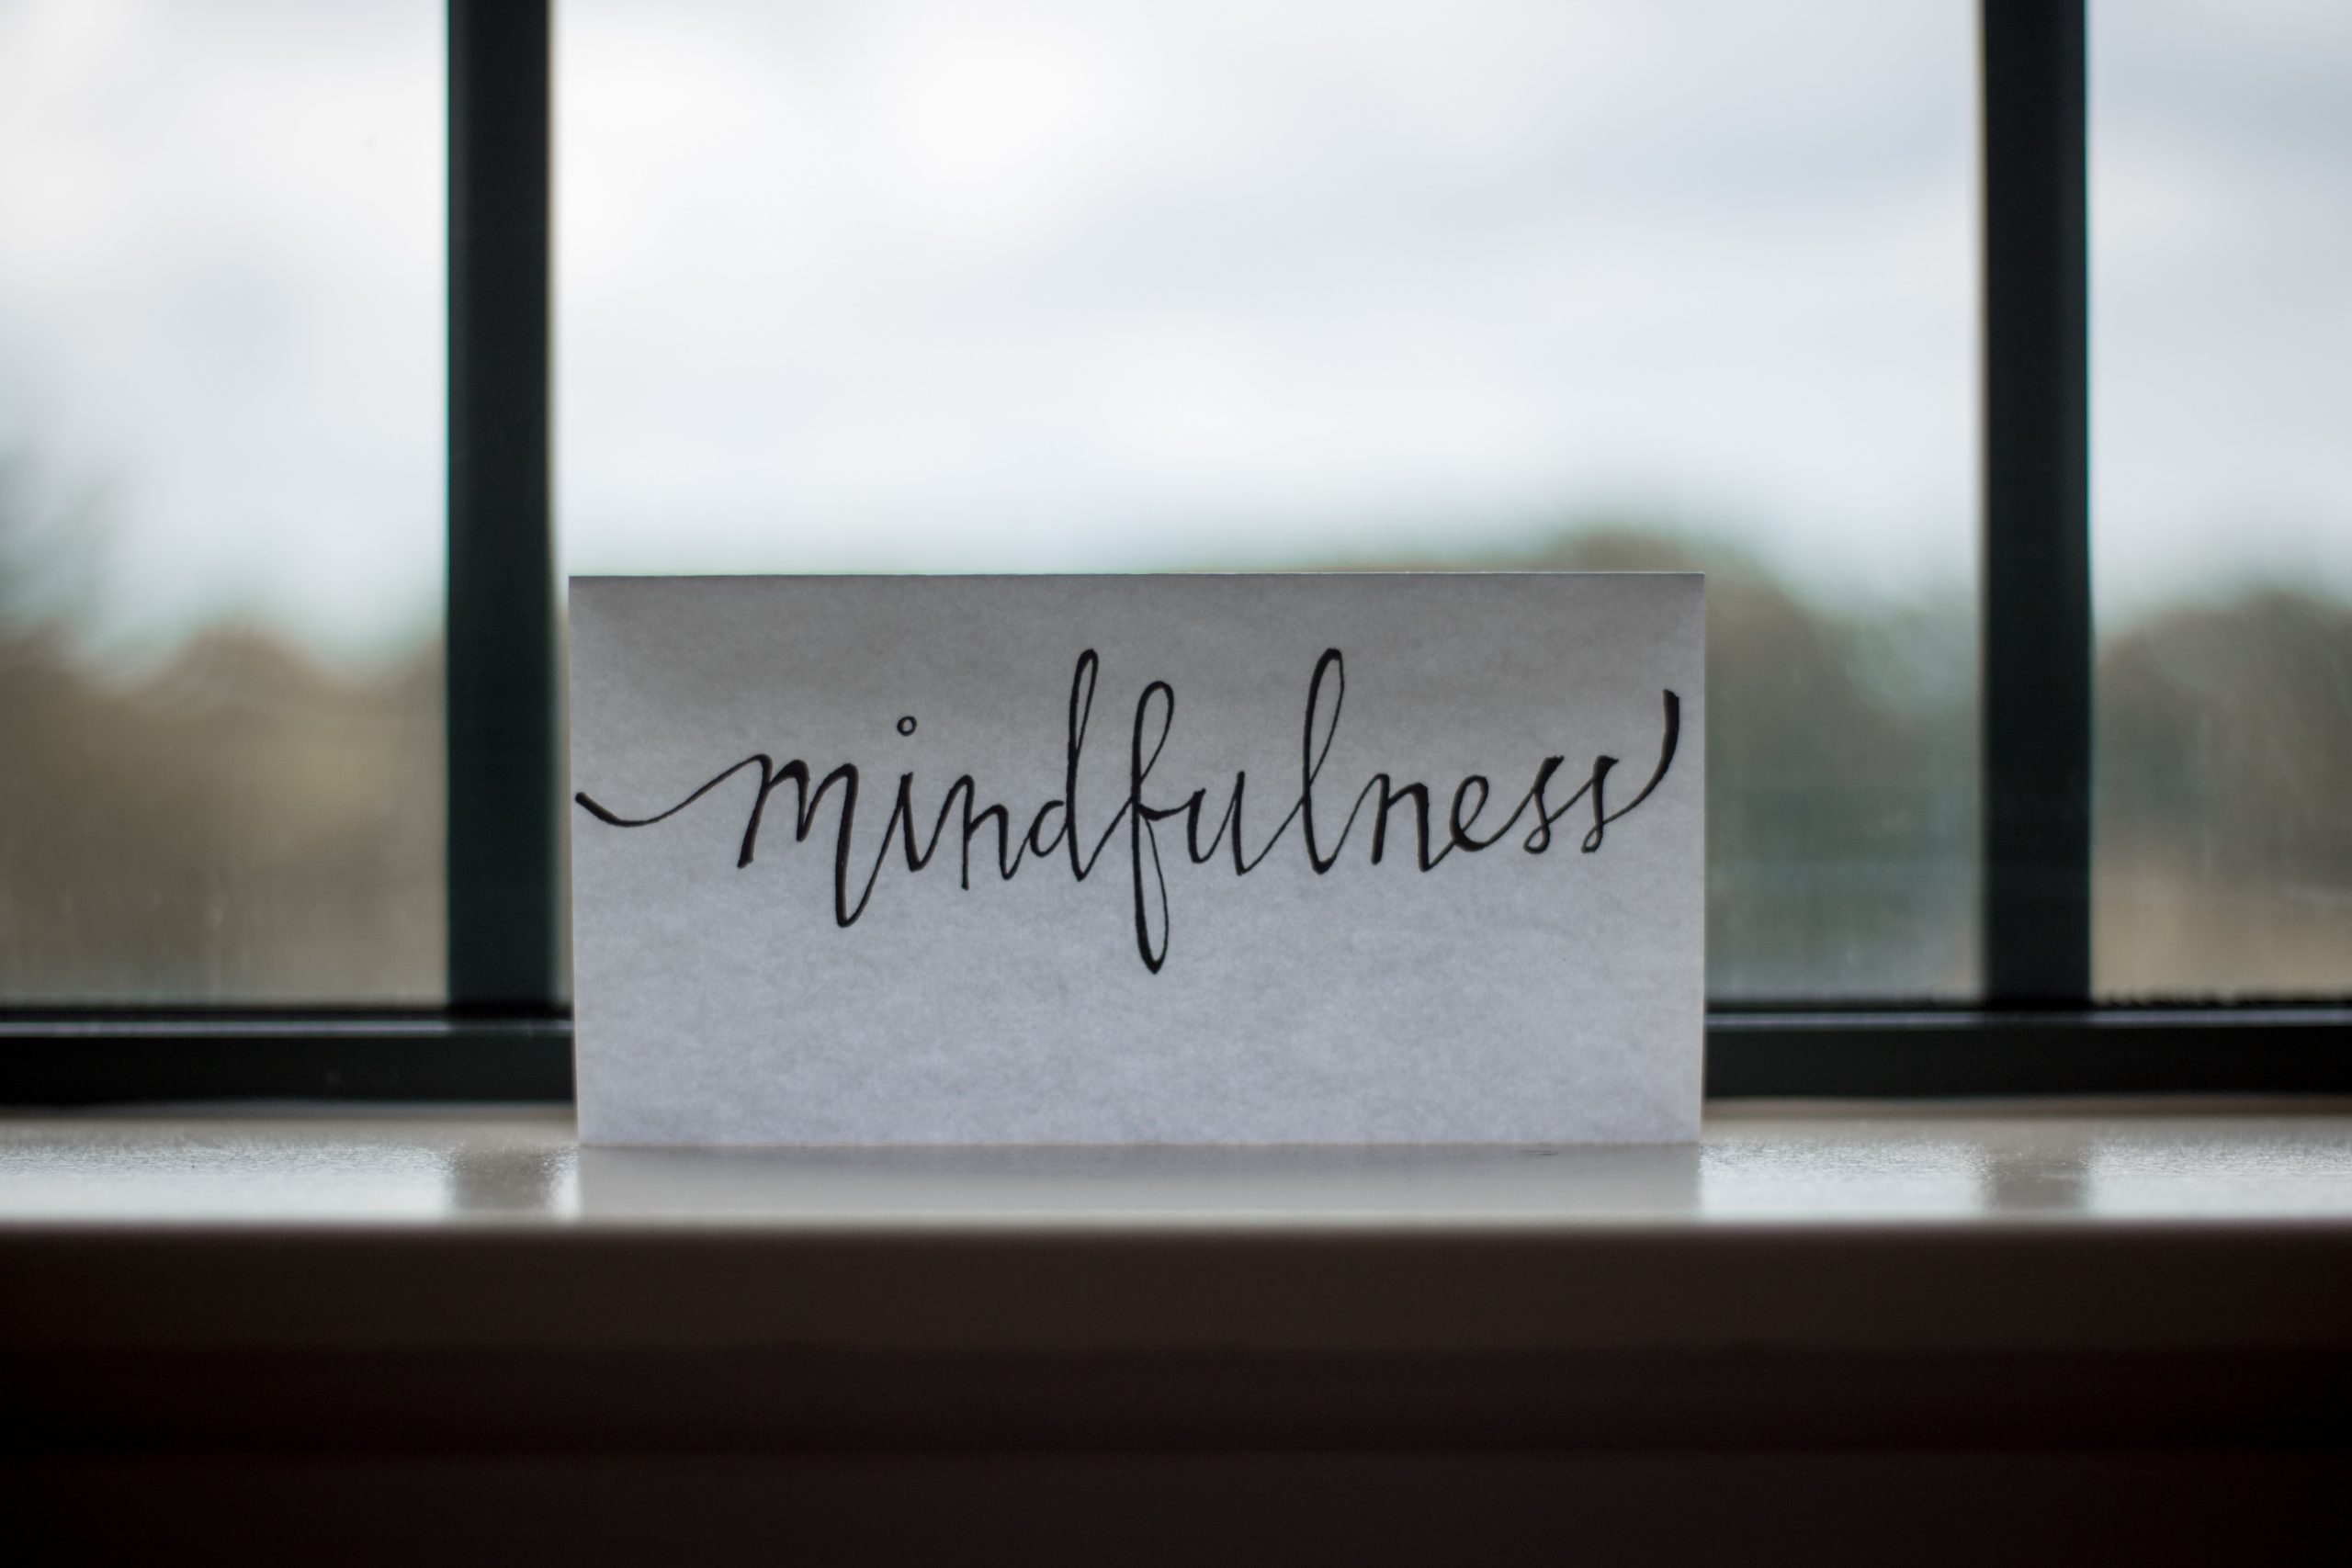 Mindfulness courses in the UK, Europe, USA and Asia led by experts in the field.